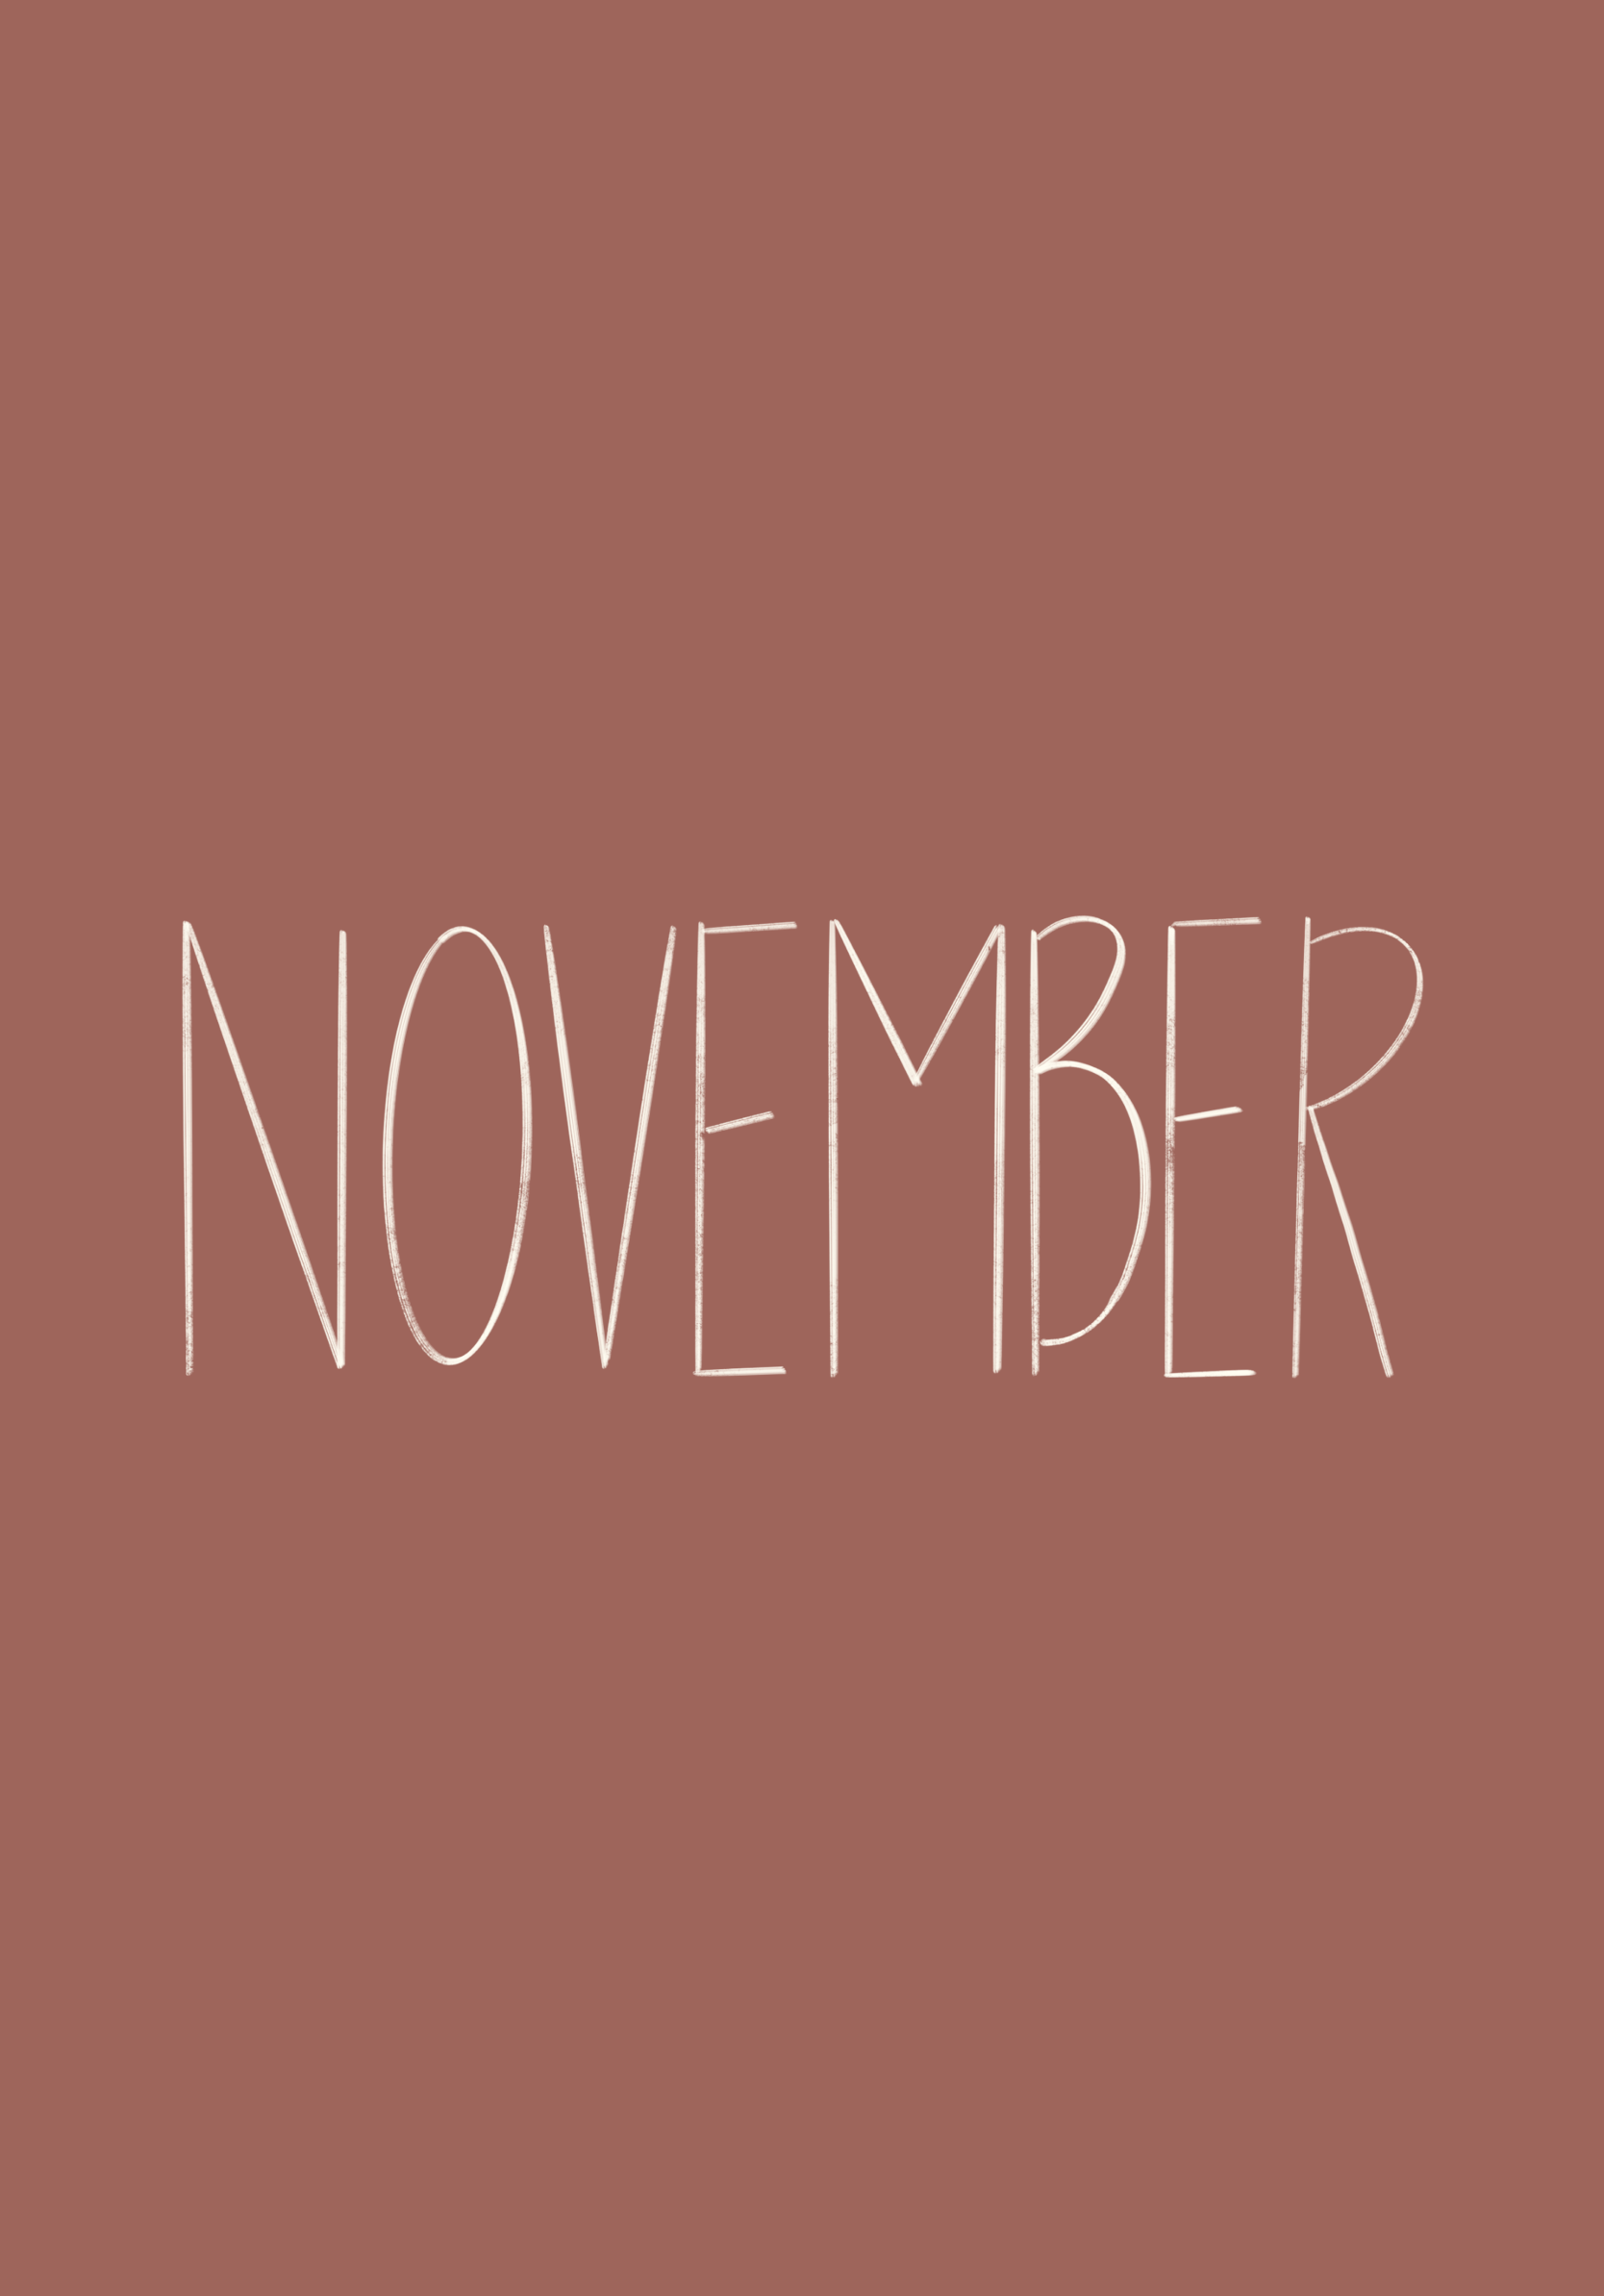 November Backgrounds for Desktop, iPhone and Tablet - Welcome